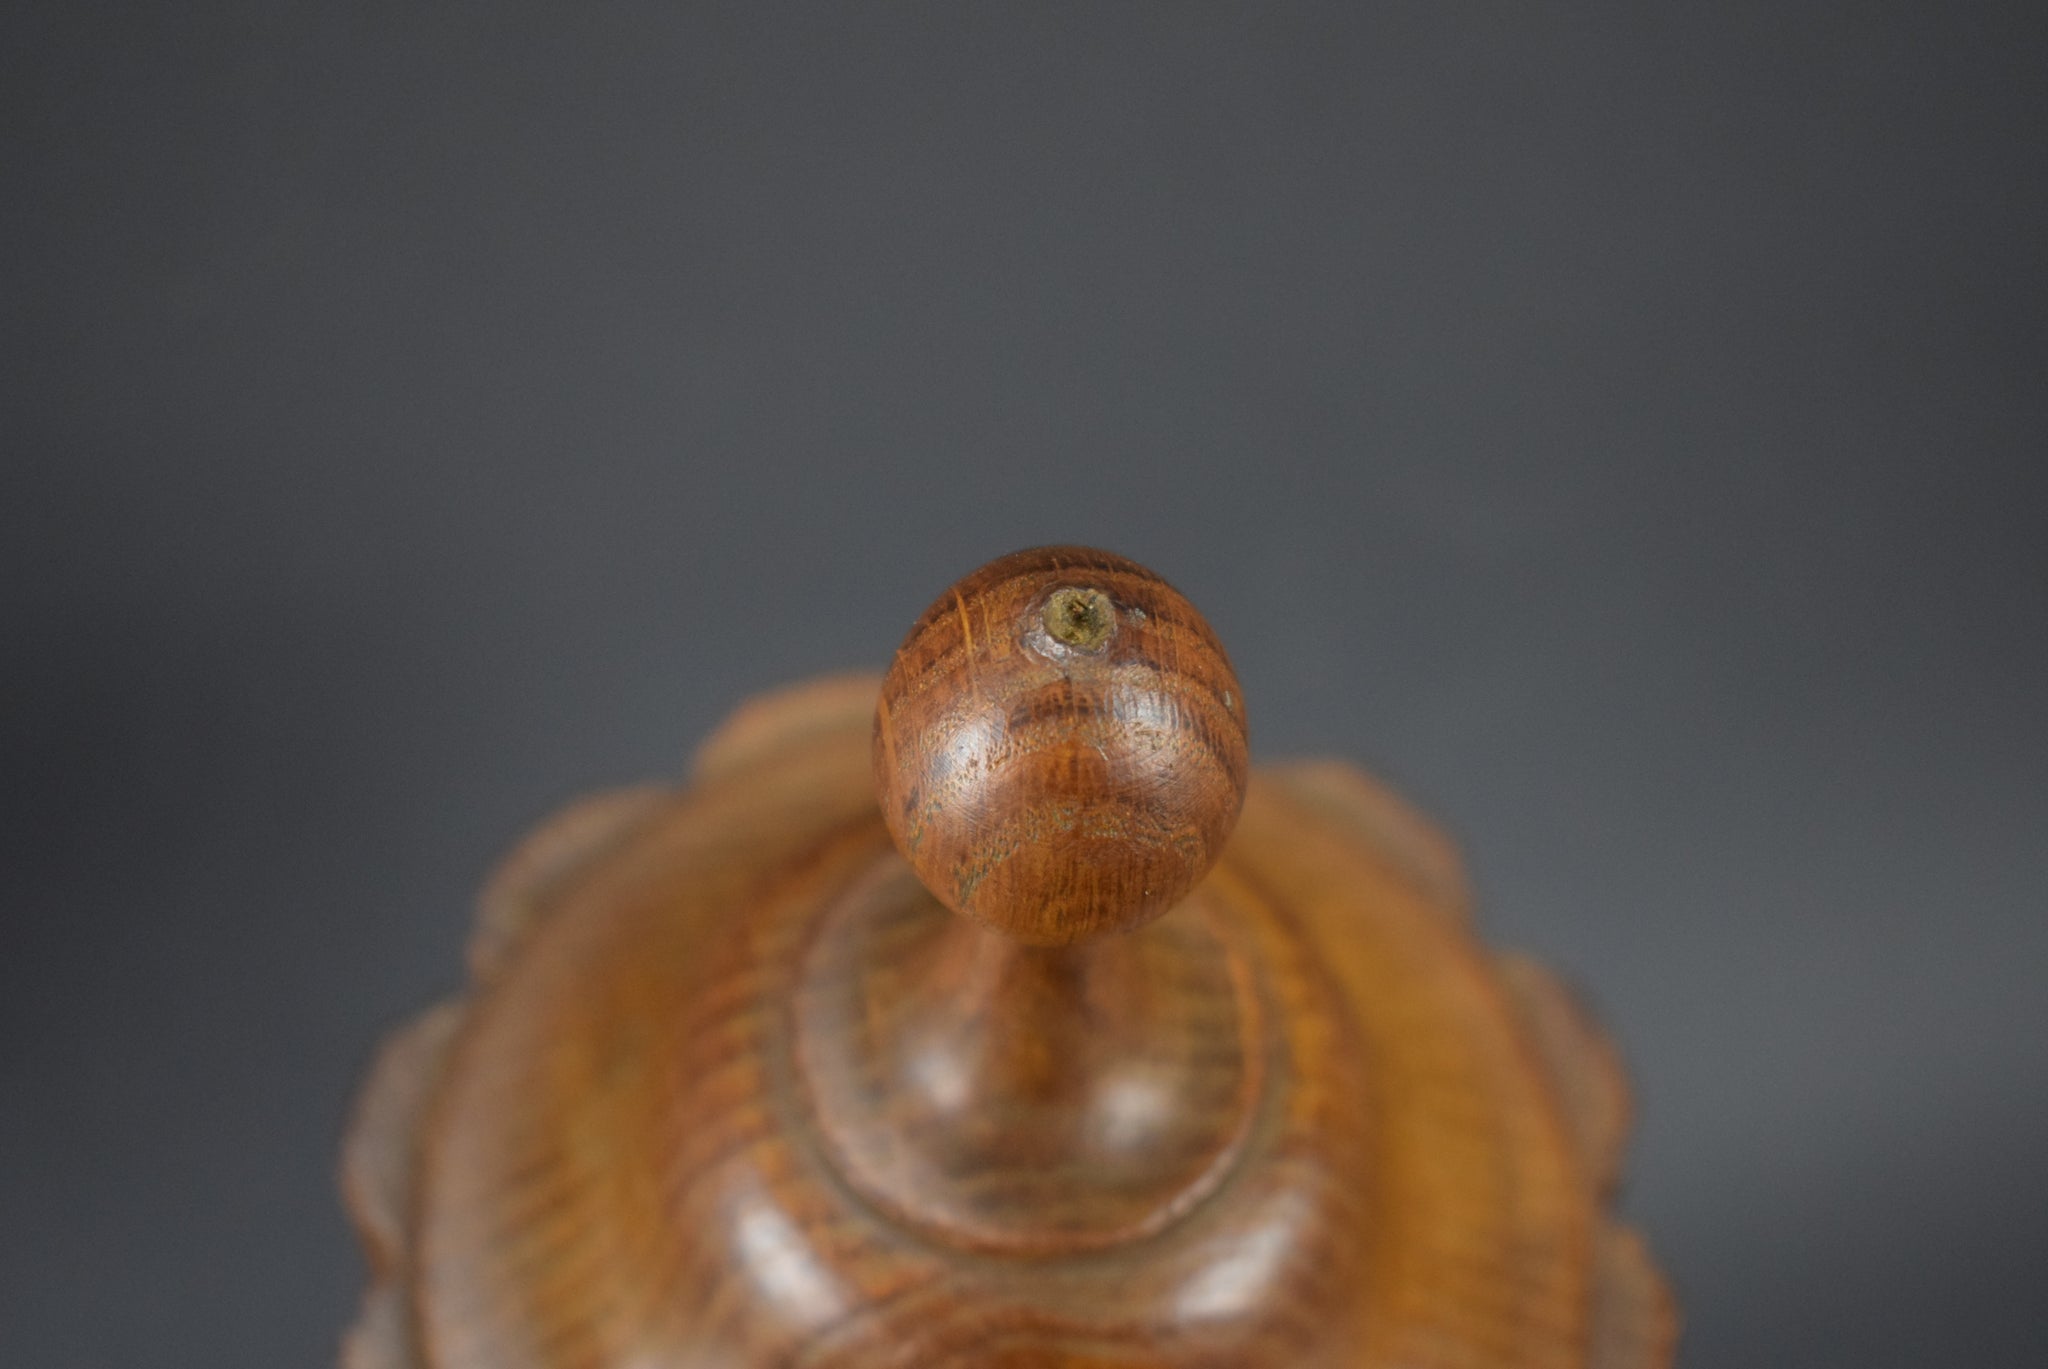 Wood Stairwell Finial - Charmantiques